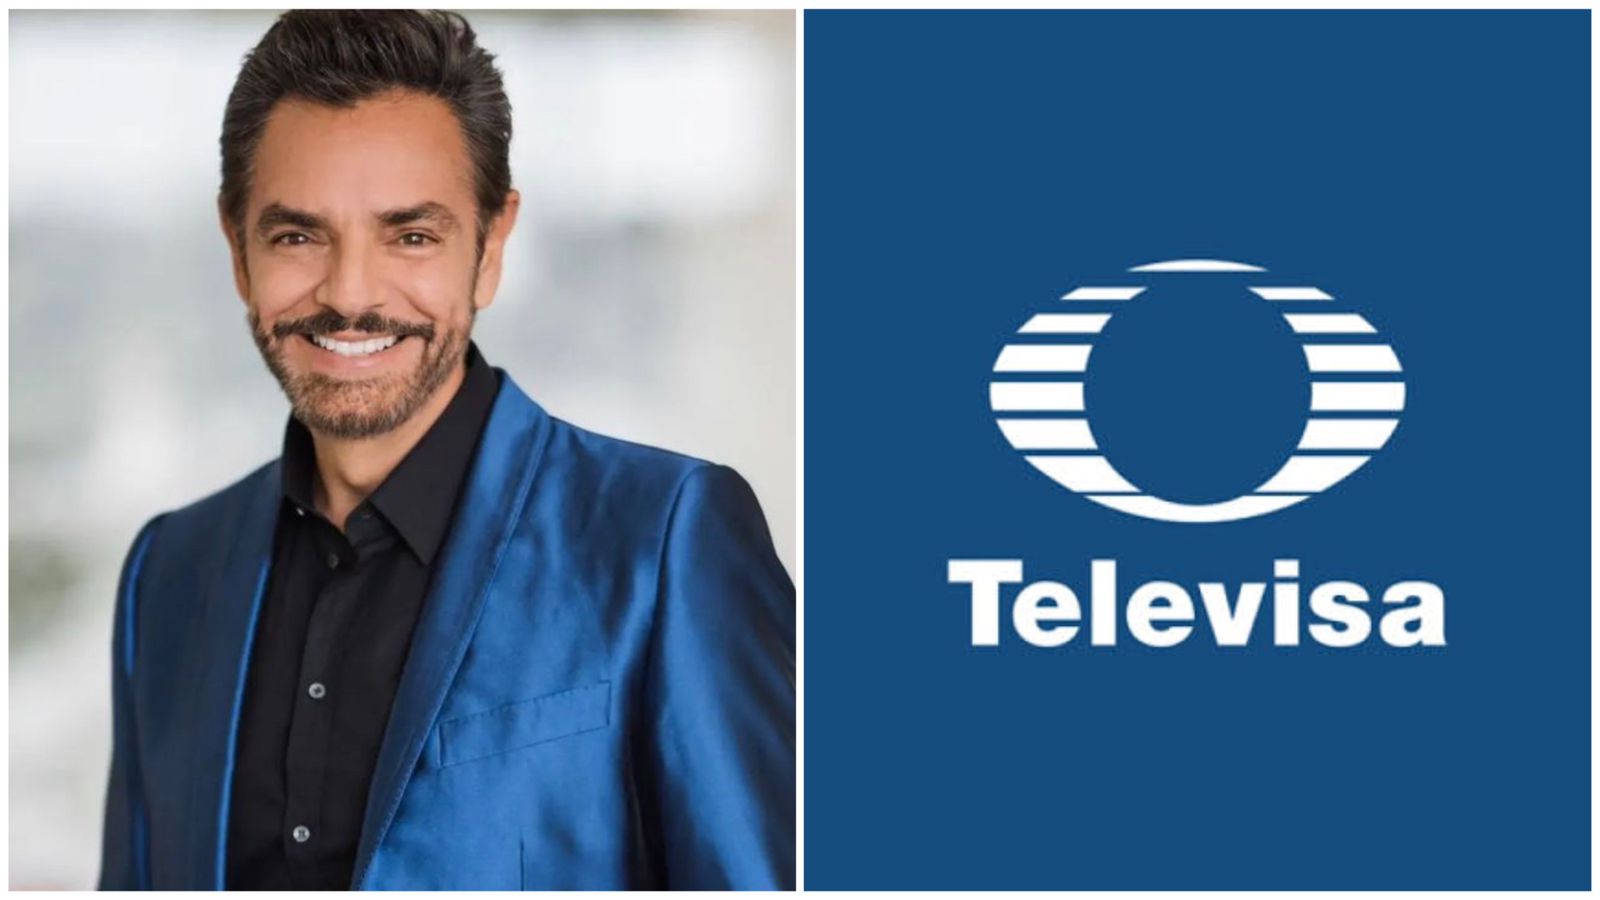 The actor admitted that Televisa would have vetoed him (Images: Instagram/@ederbez/@televisa)